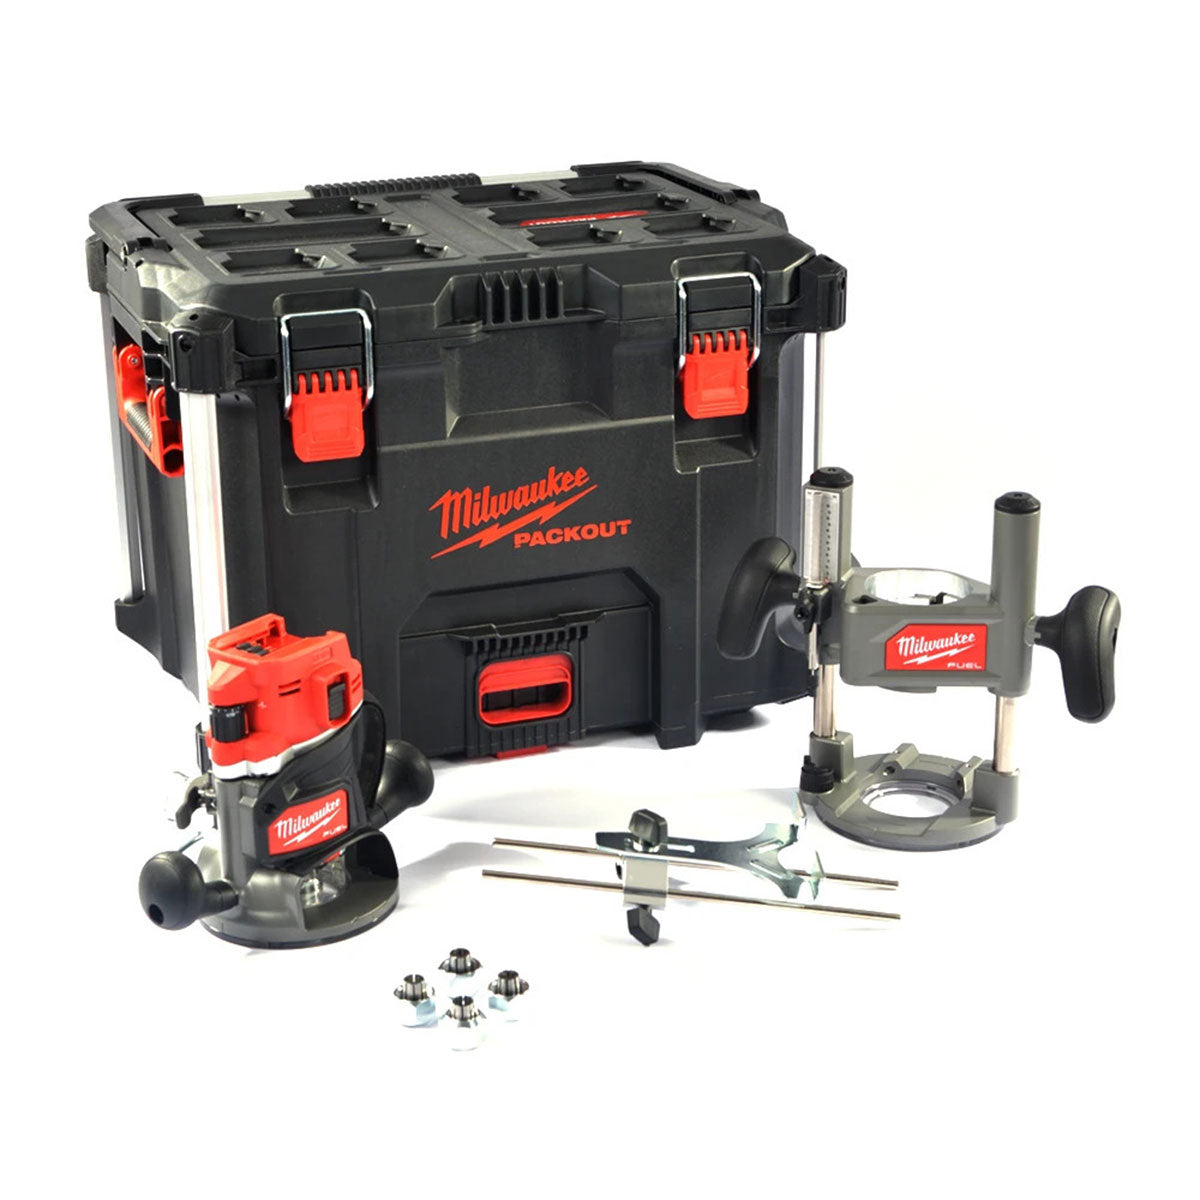 Milwaukee 18V M18 FR12KIT Fuel Brushless 1/2" Router Cutter with 12 Piece Cutter Set